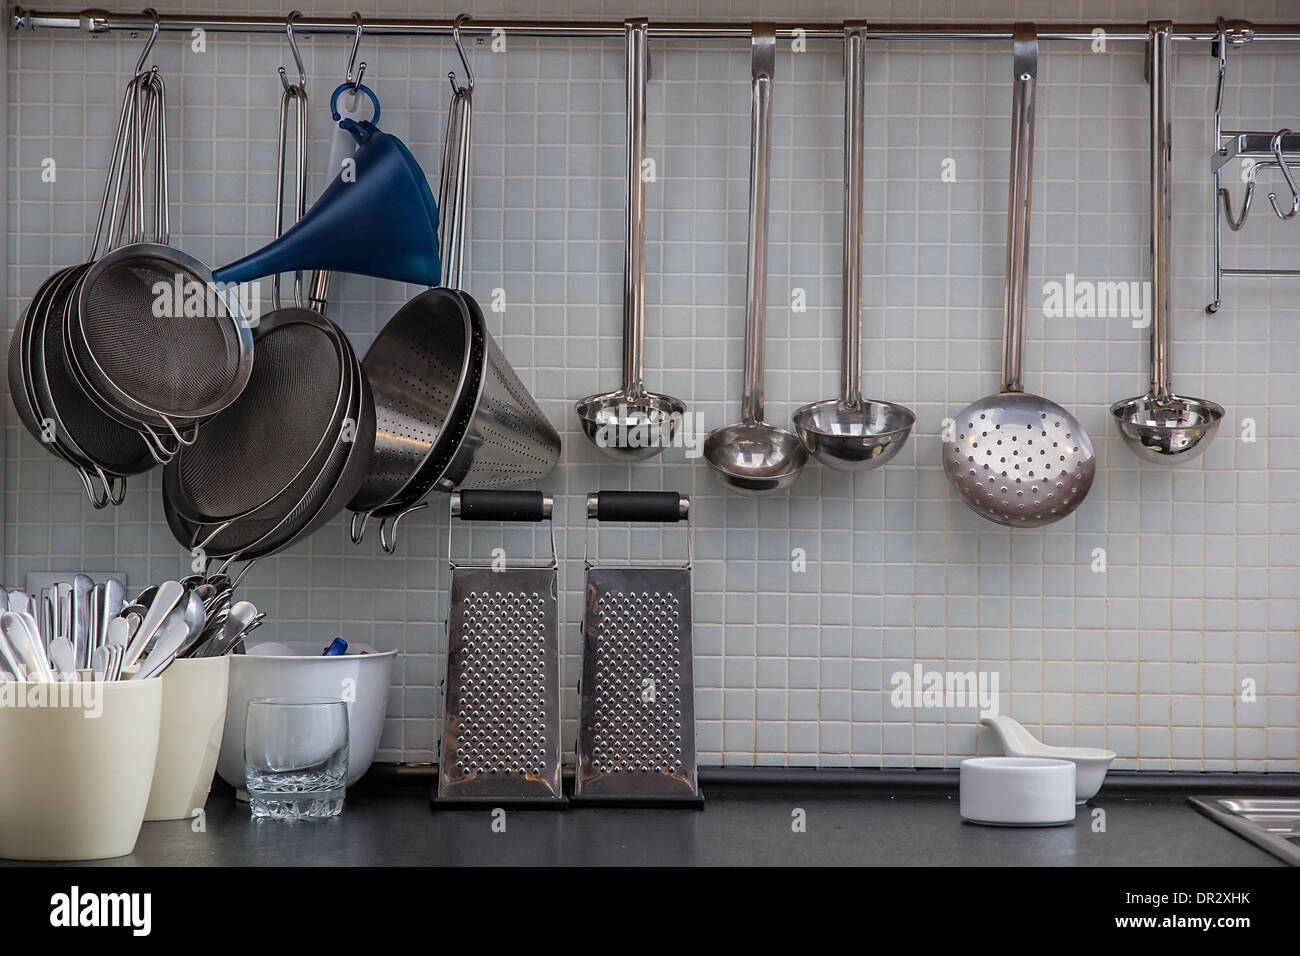 Some utensil on the kitchen wall Stock Photo